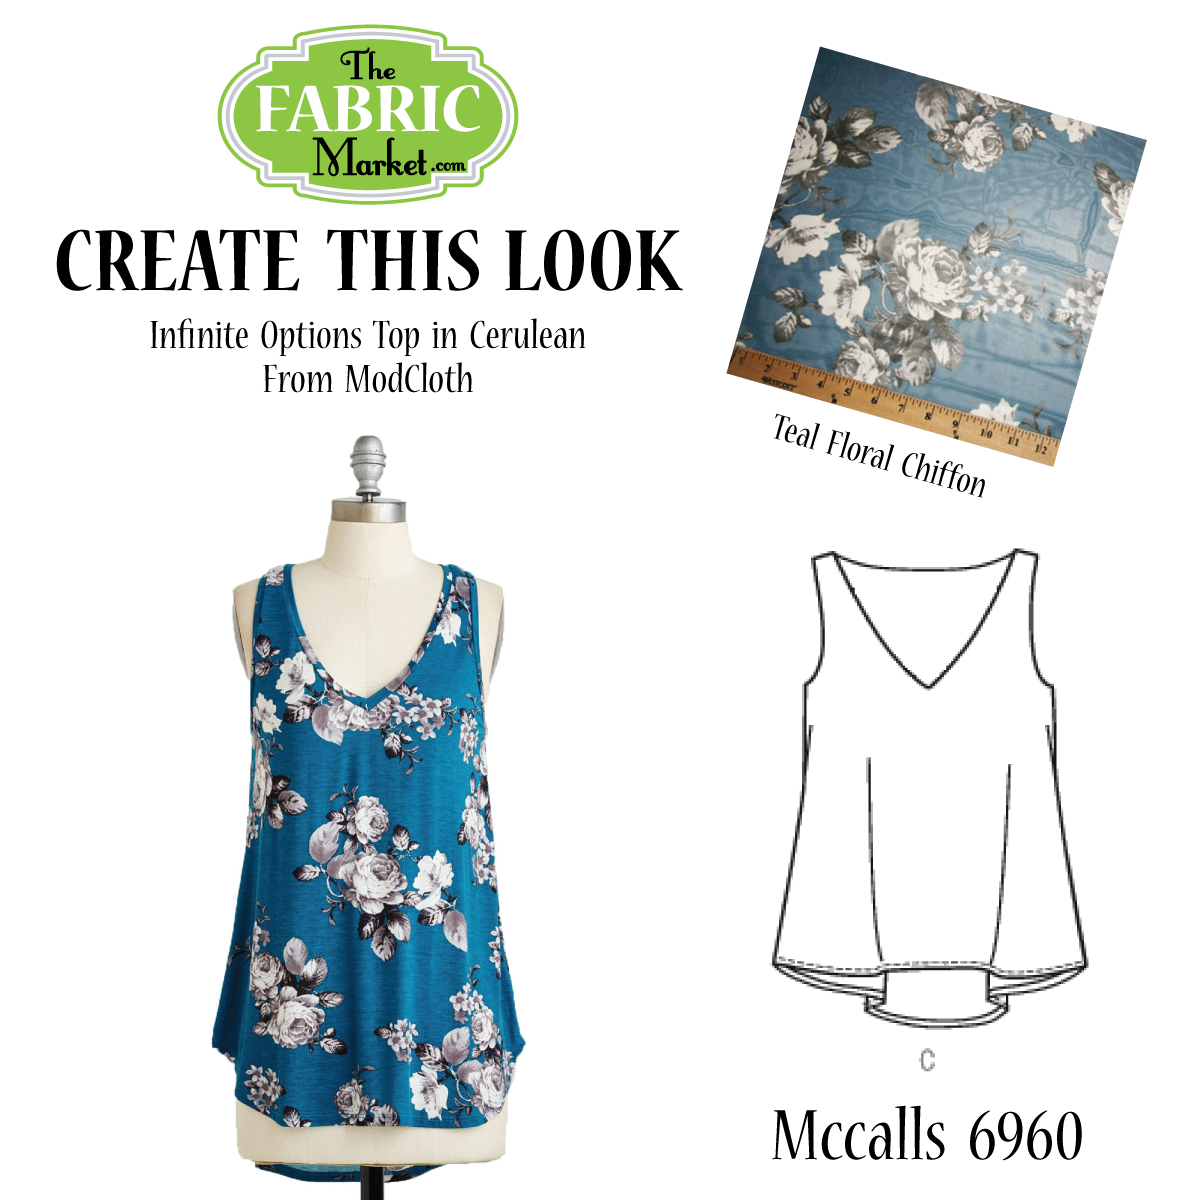 Create This Look - Watercolor Floral Chiffon - The Fabric Market